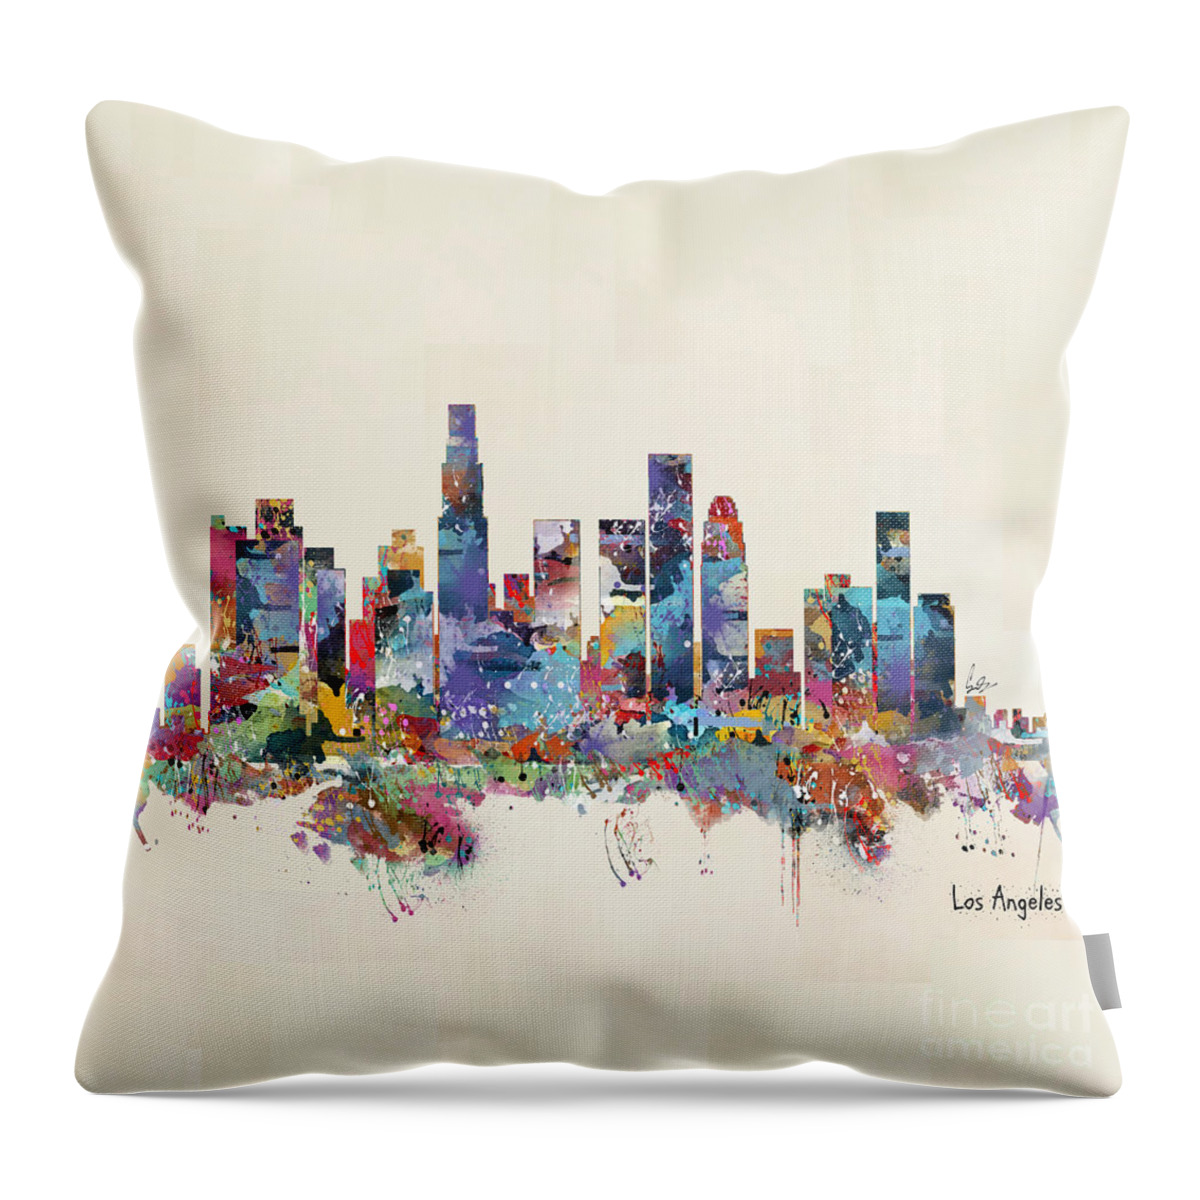 Los Angeles California Throw Pillow featuring the painting Los Angeles California Skyline #1 by Bri Buckley